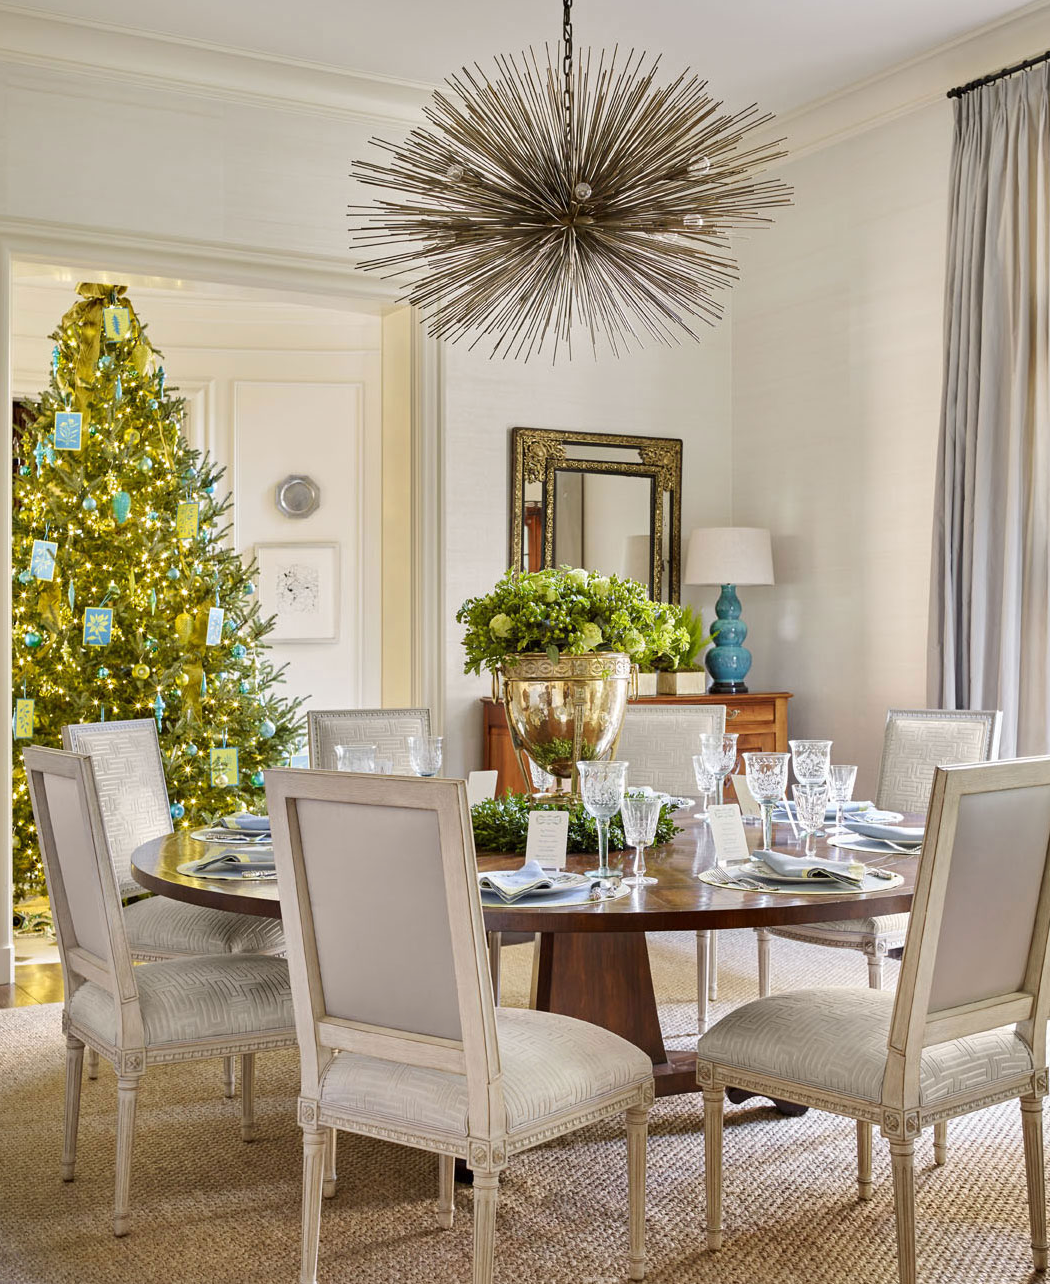 <a href="http://huffdewberry.com" target="_blank">Will Huff and Heather Dewberry </a>added shots of turquoise and chartreuse to their holiday palette for a Buckhead client. From <a href="http://www.traditionalhome.com/category/beautiful-homes/holiday-home-dressed-shades-blue" target="_blank">Traditional Home</a> (photo by Emily Followill.)